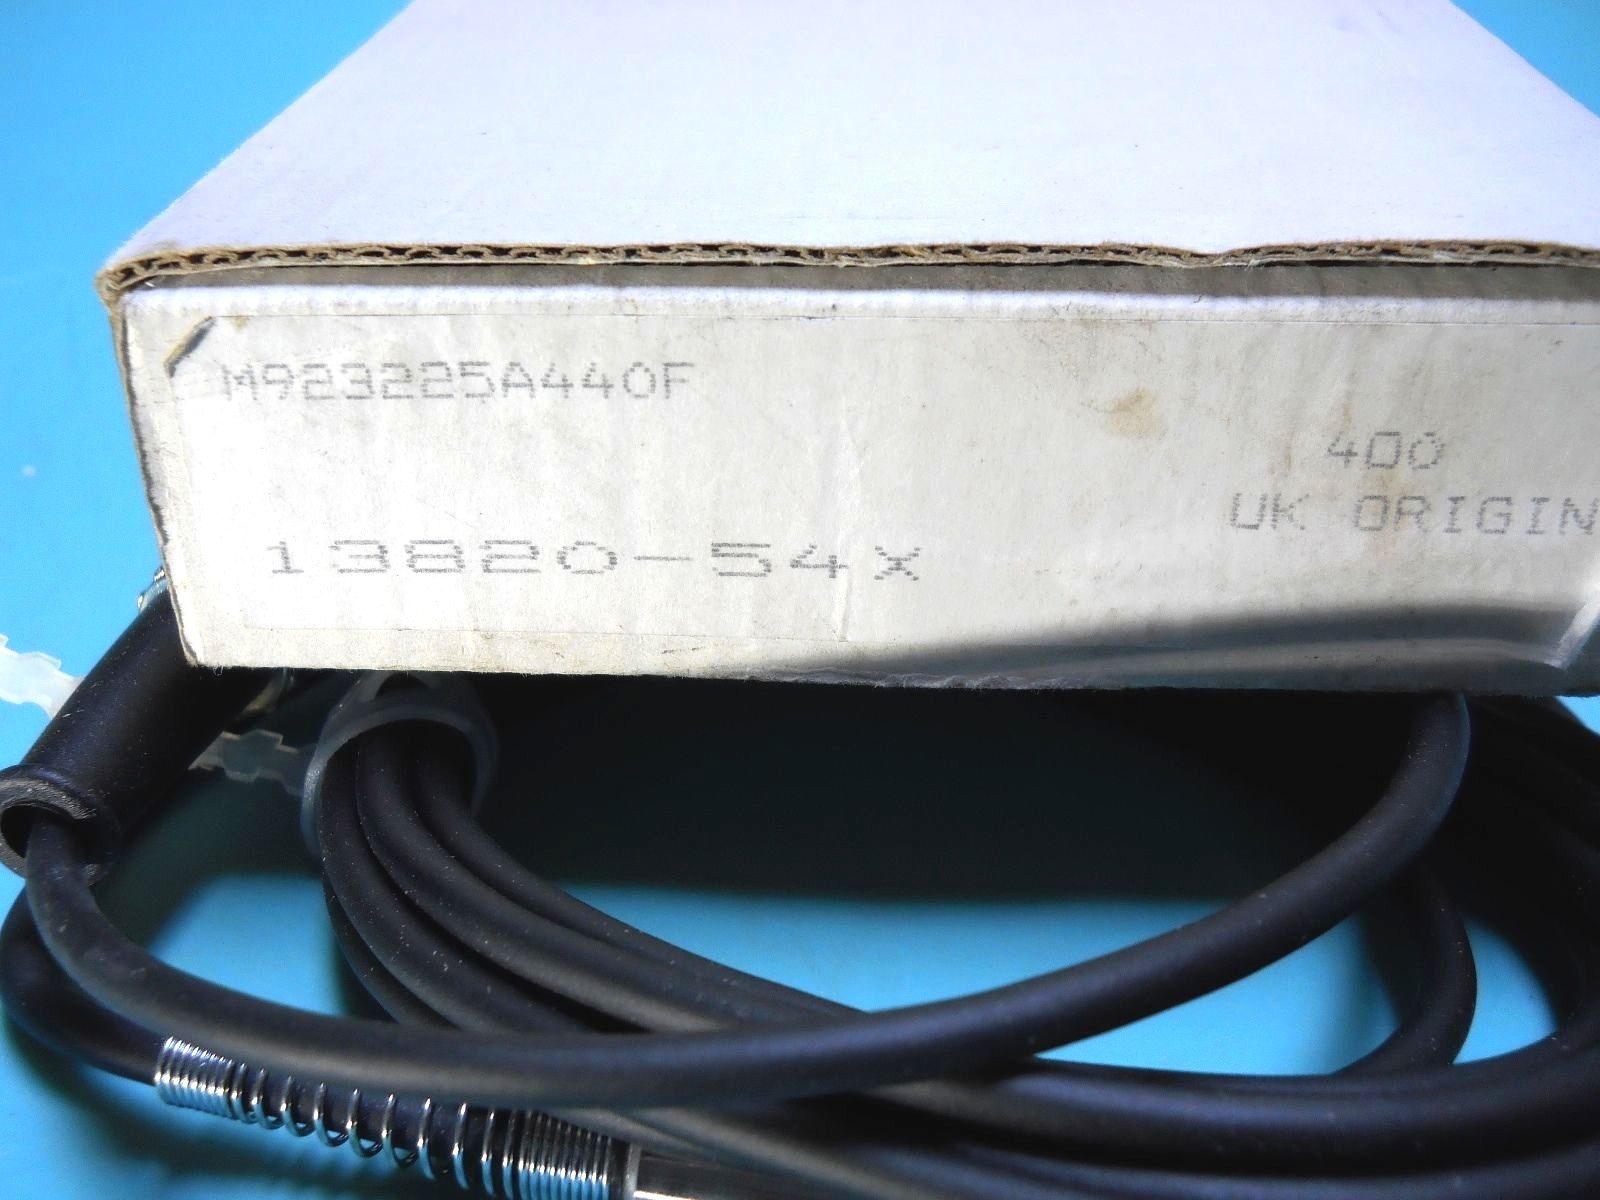 SIEMENS 13820-54X LINEAR TRANSDUCER PROBE ASSEMBLY M923225A440F-02 NEW IN BOX DIAGNOSTIC ULTRASOUND MACHINES FOR SALE